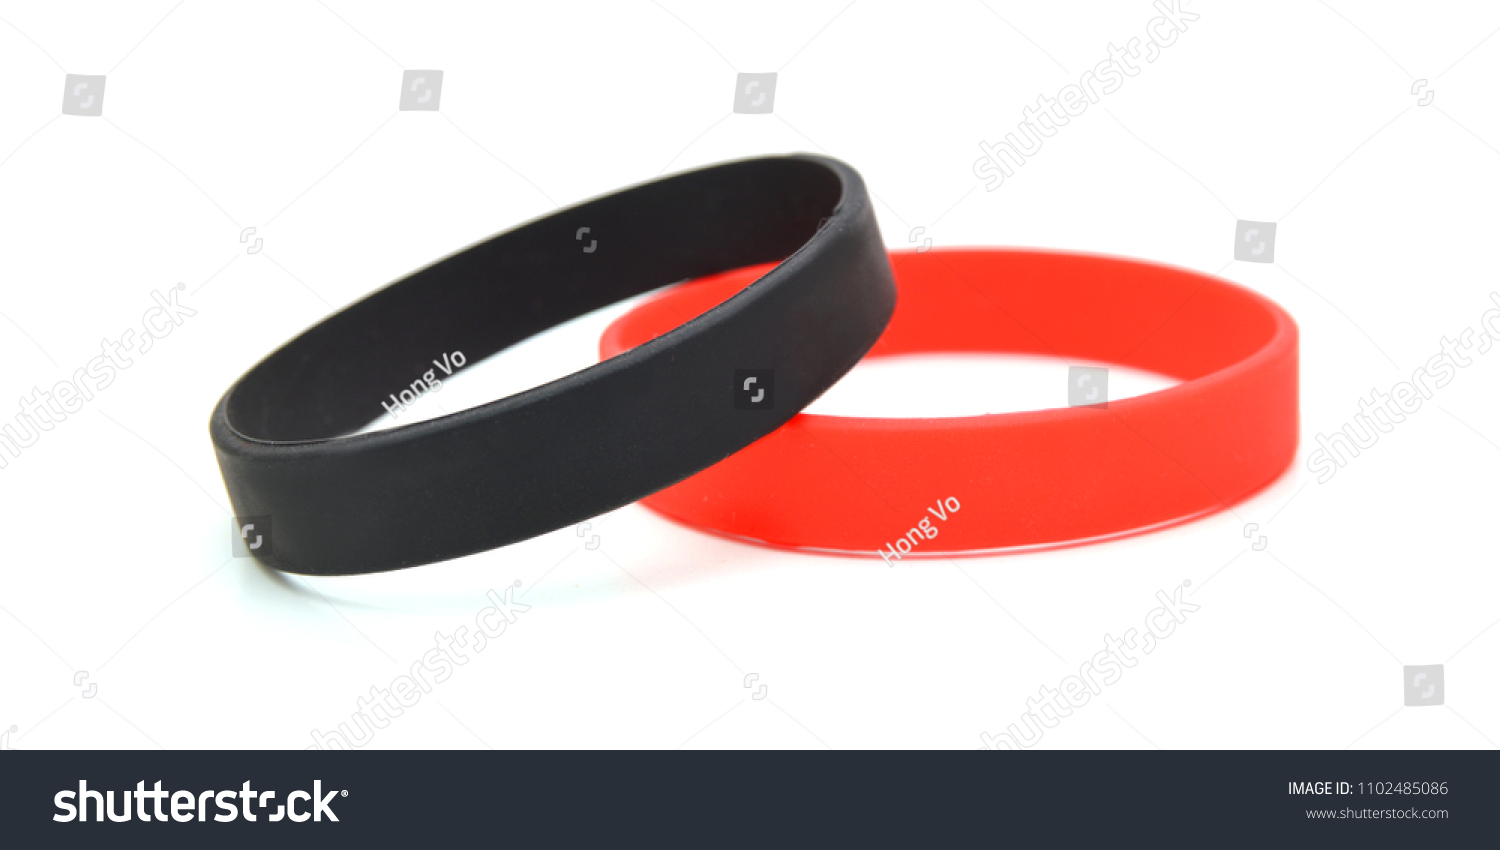 Download Blank Black Red Rubber Wristband Mockup Stock Photo Edit Now 1102485086